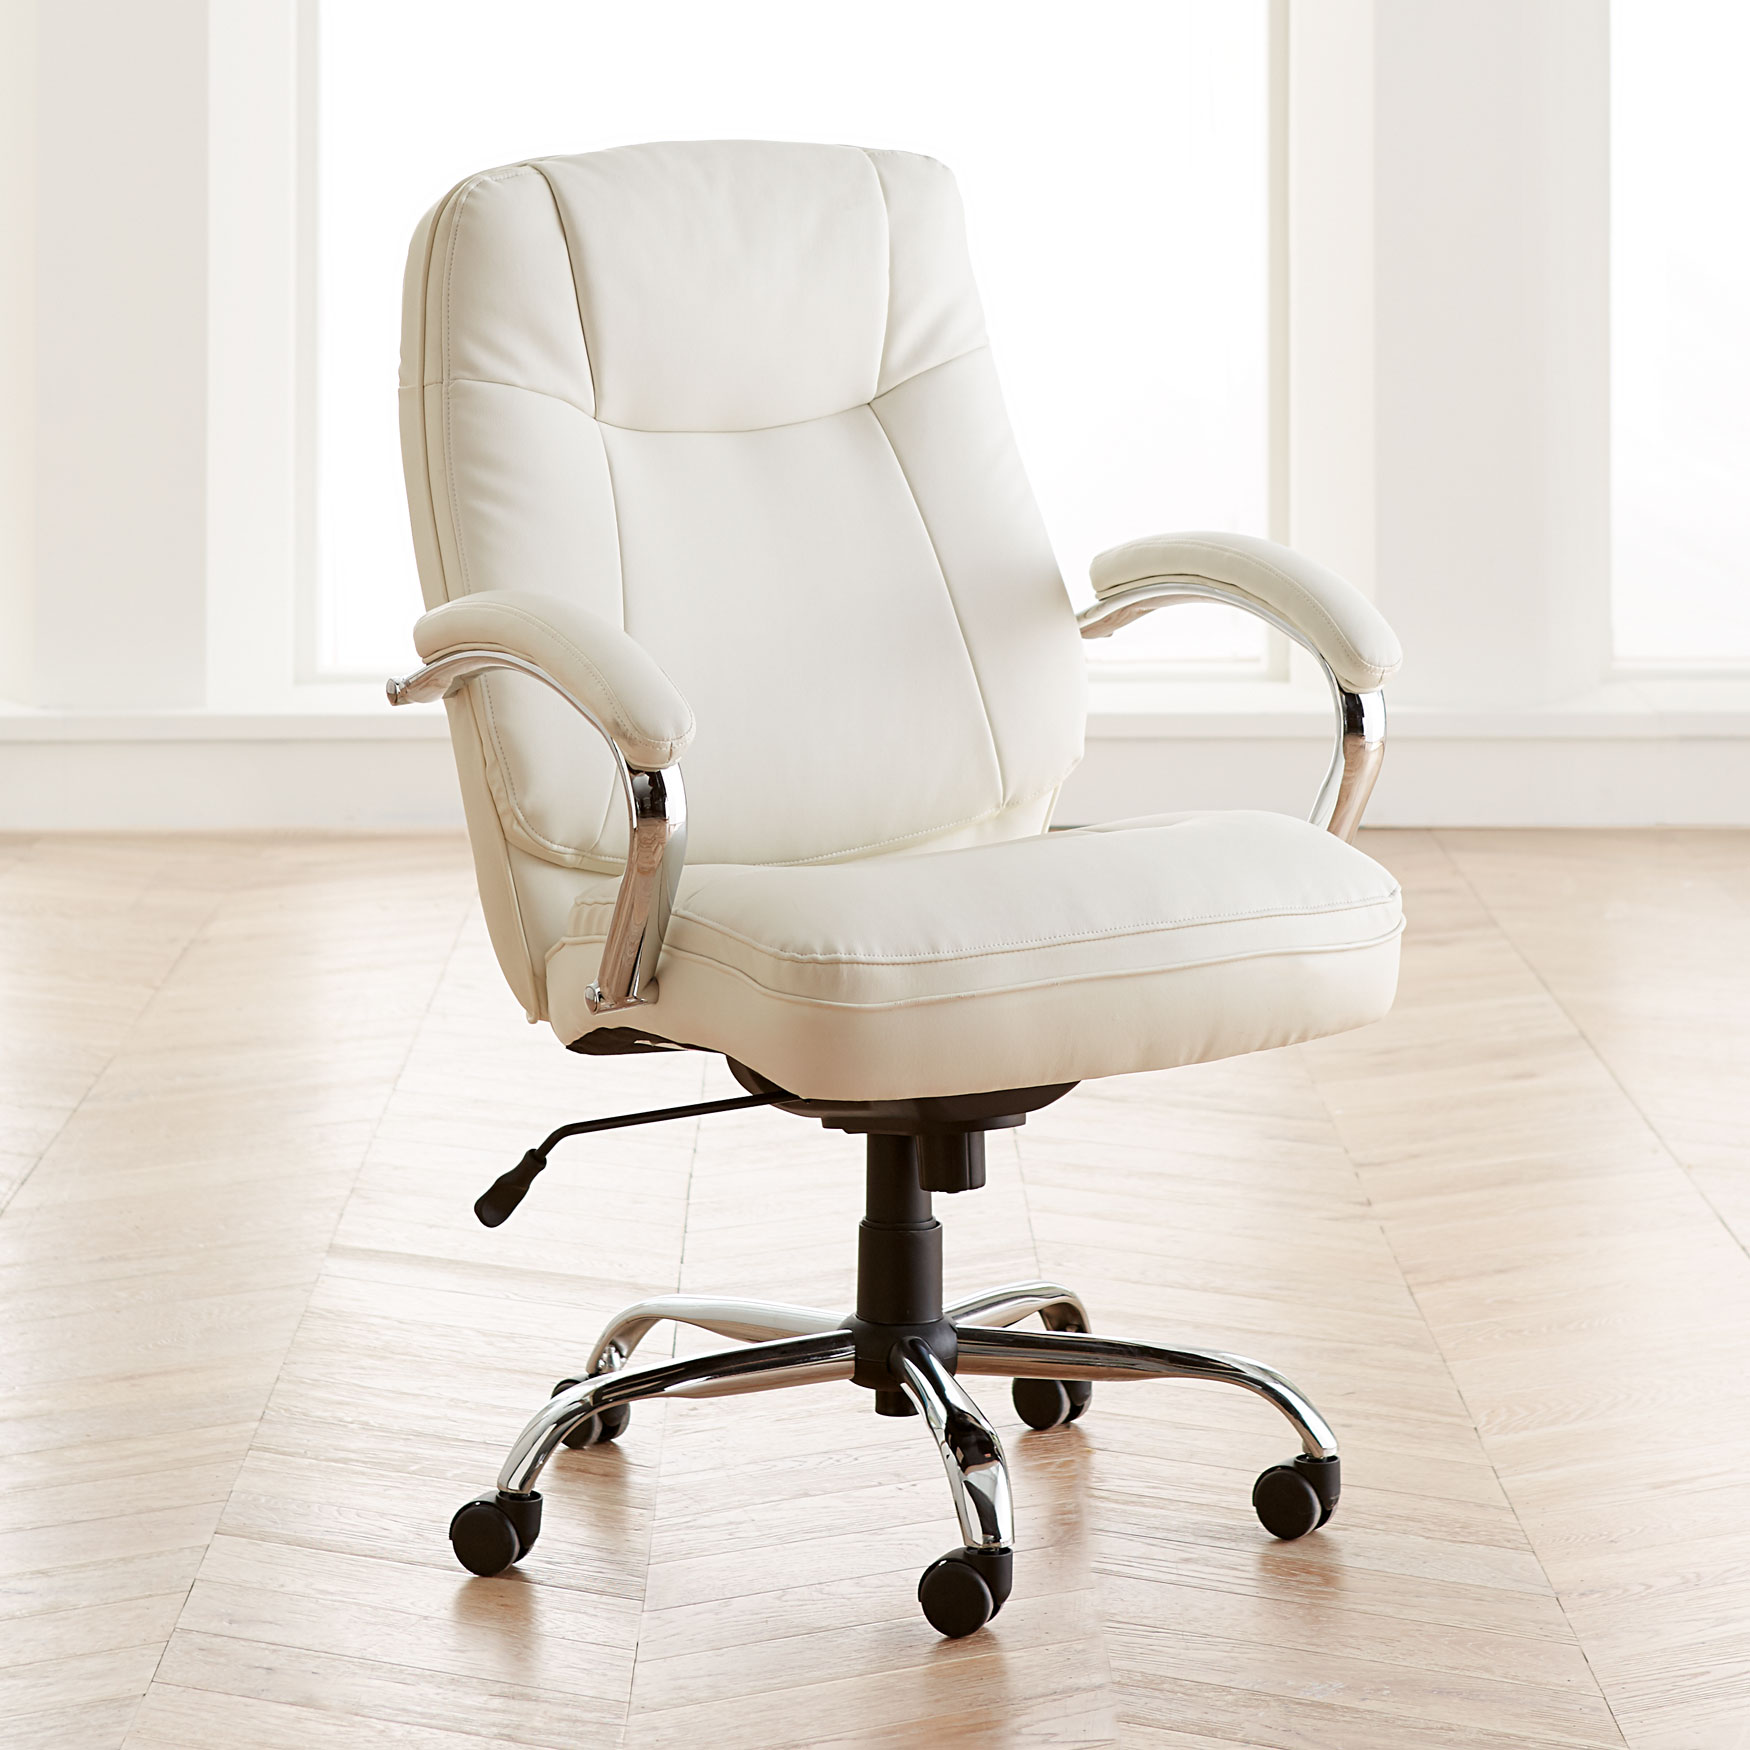 Oversized Women&apos;s Office Chair, 